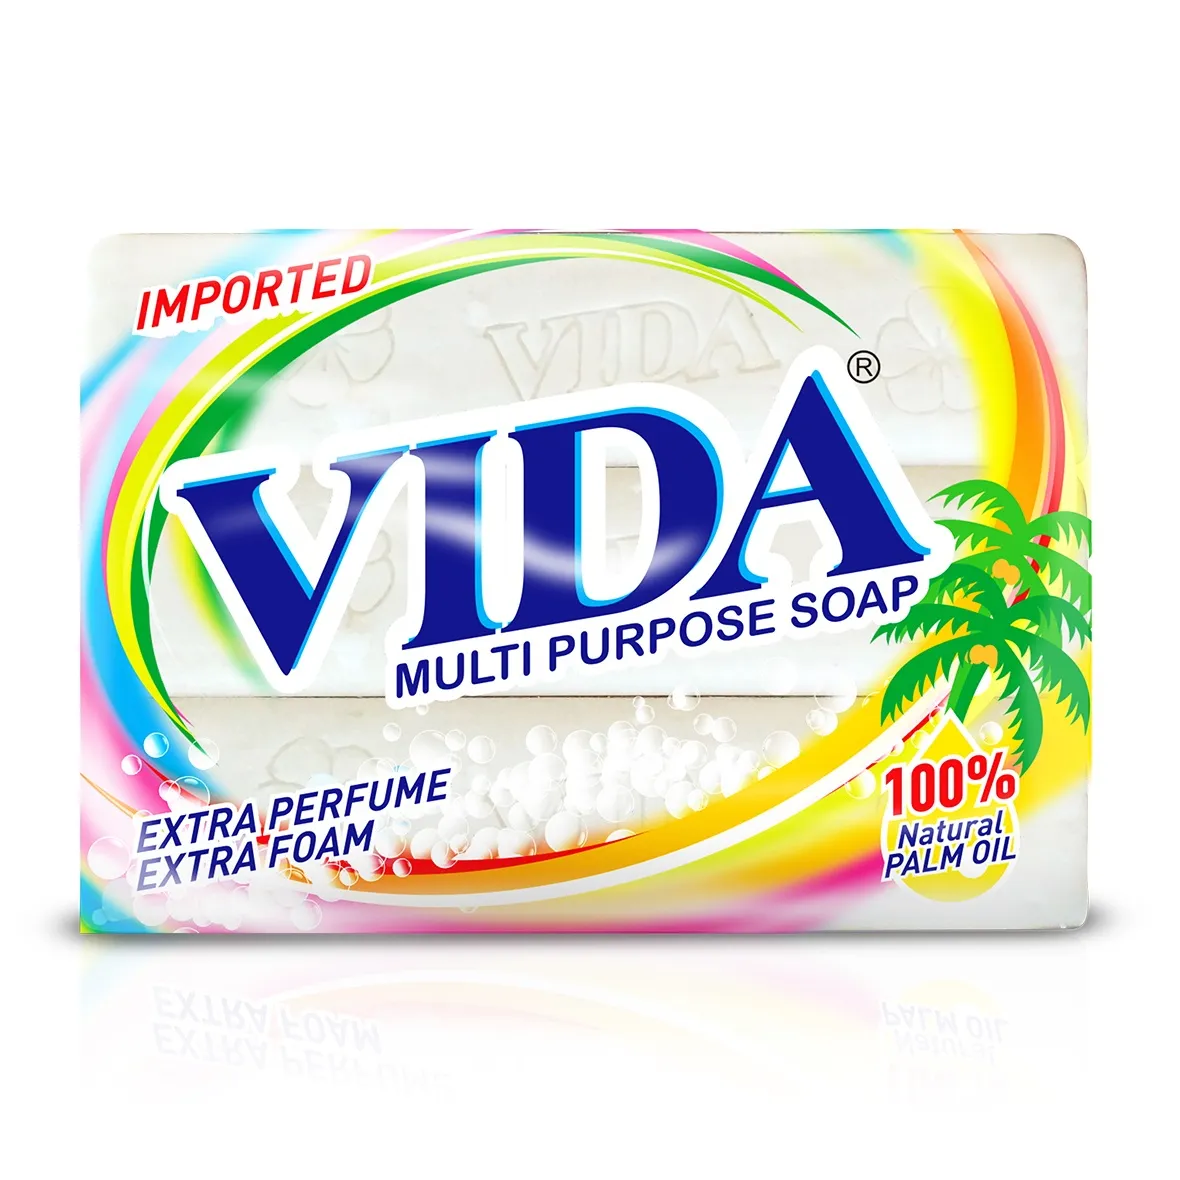 Vida Laundry Soap allpurpose soap for washing clothes with extra foam and good perfume also can use for taking a bath and soft